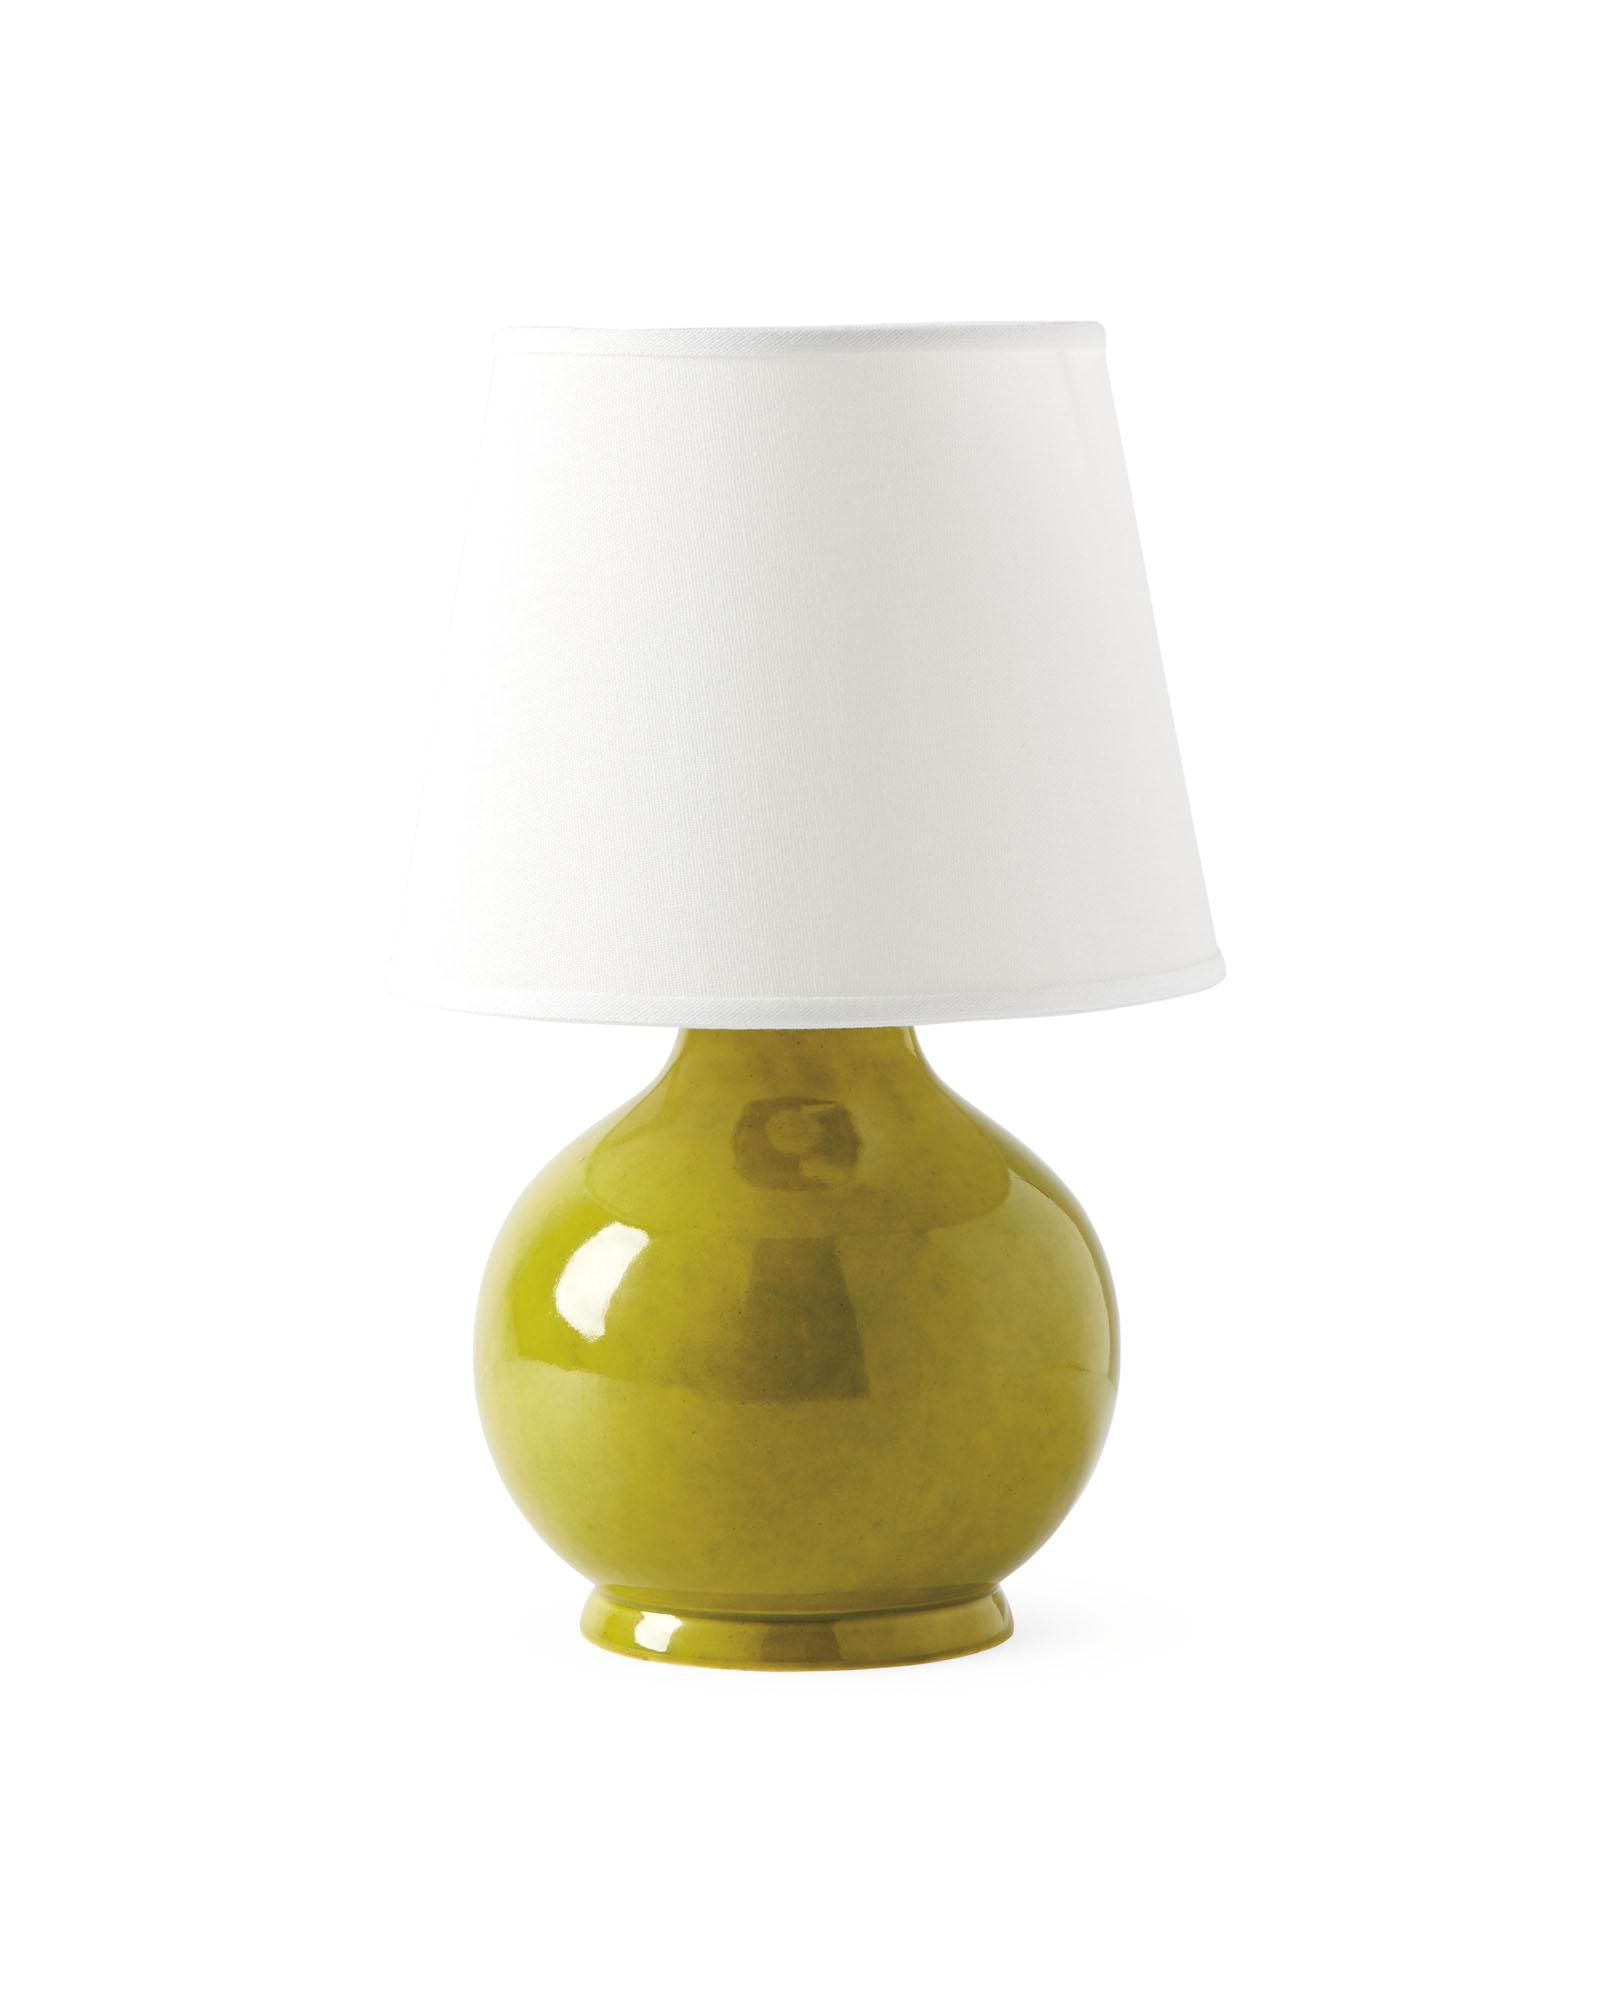 Como Bedside Lamp | Serena and Lily